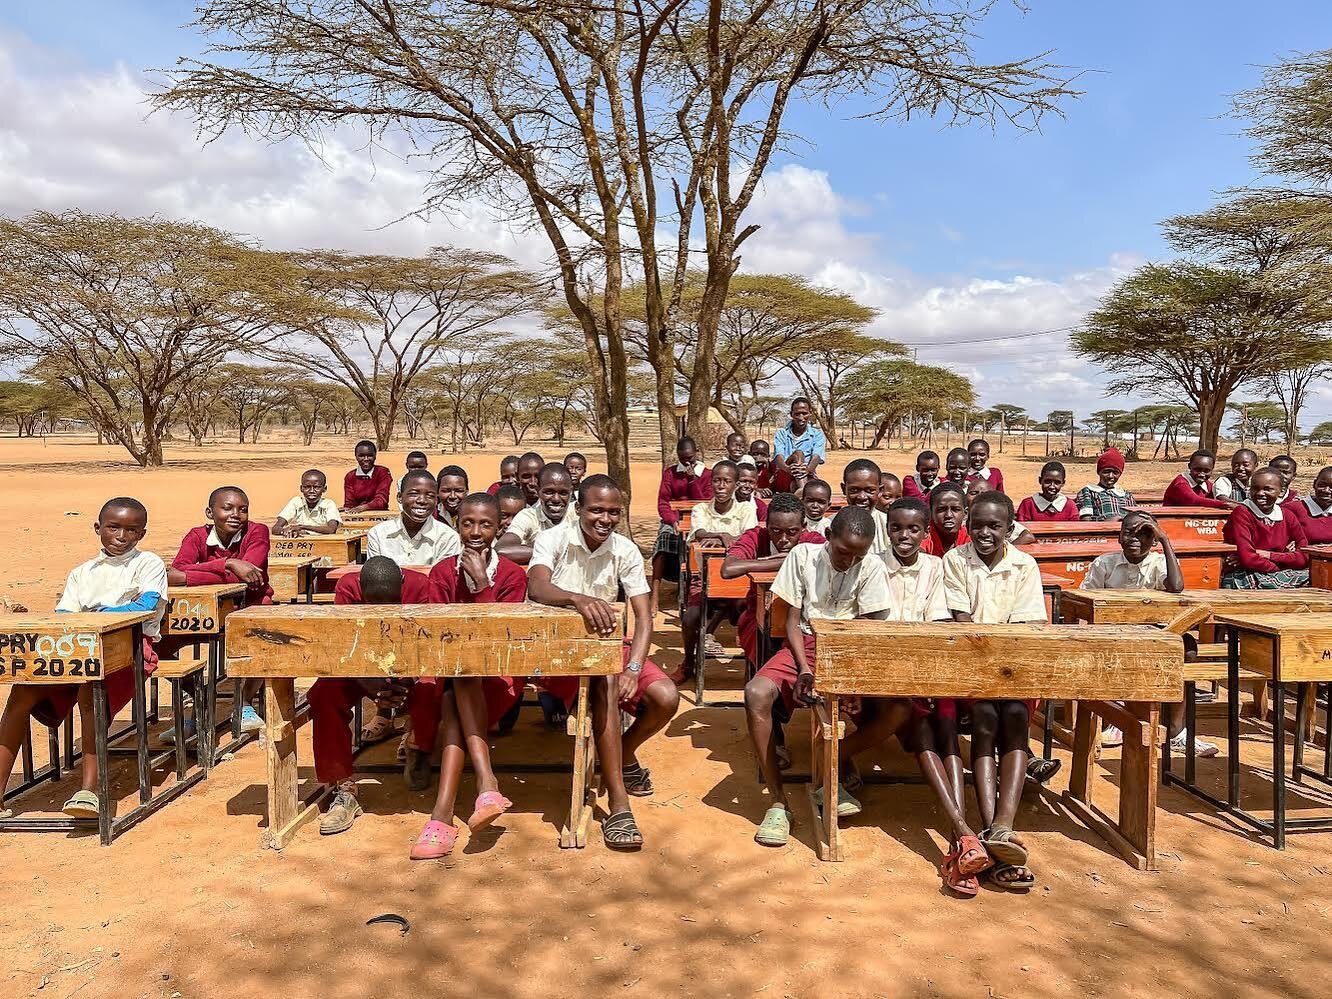 Did you know that you can do your #backtoschoolshopping while also providing access to clean water to communities in Samburu? @amazonsmile makes it easier than ever for you to make a difference. Simply designate The Samburu Project as your charity of